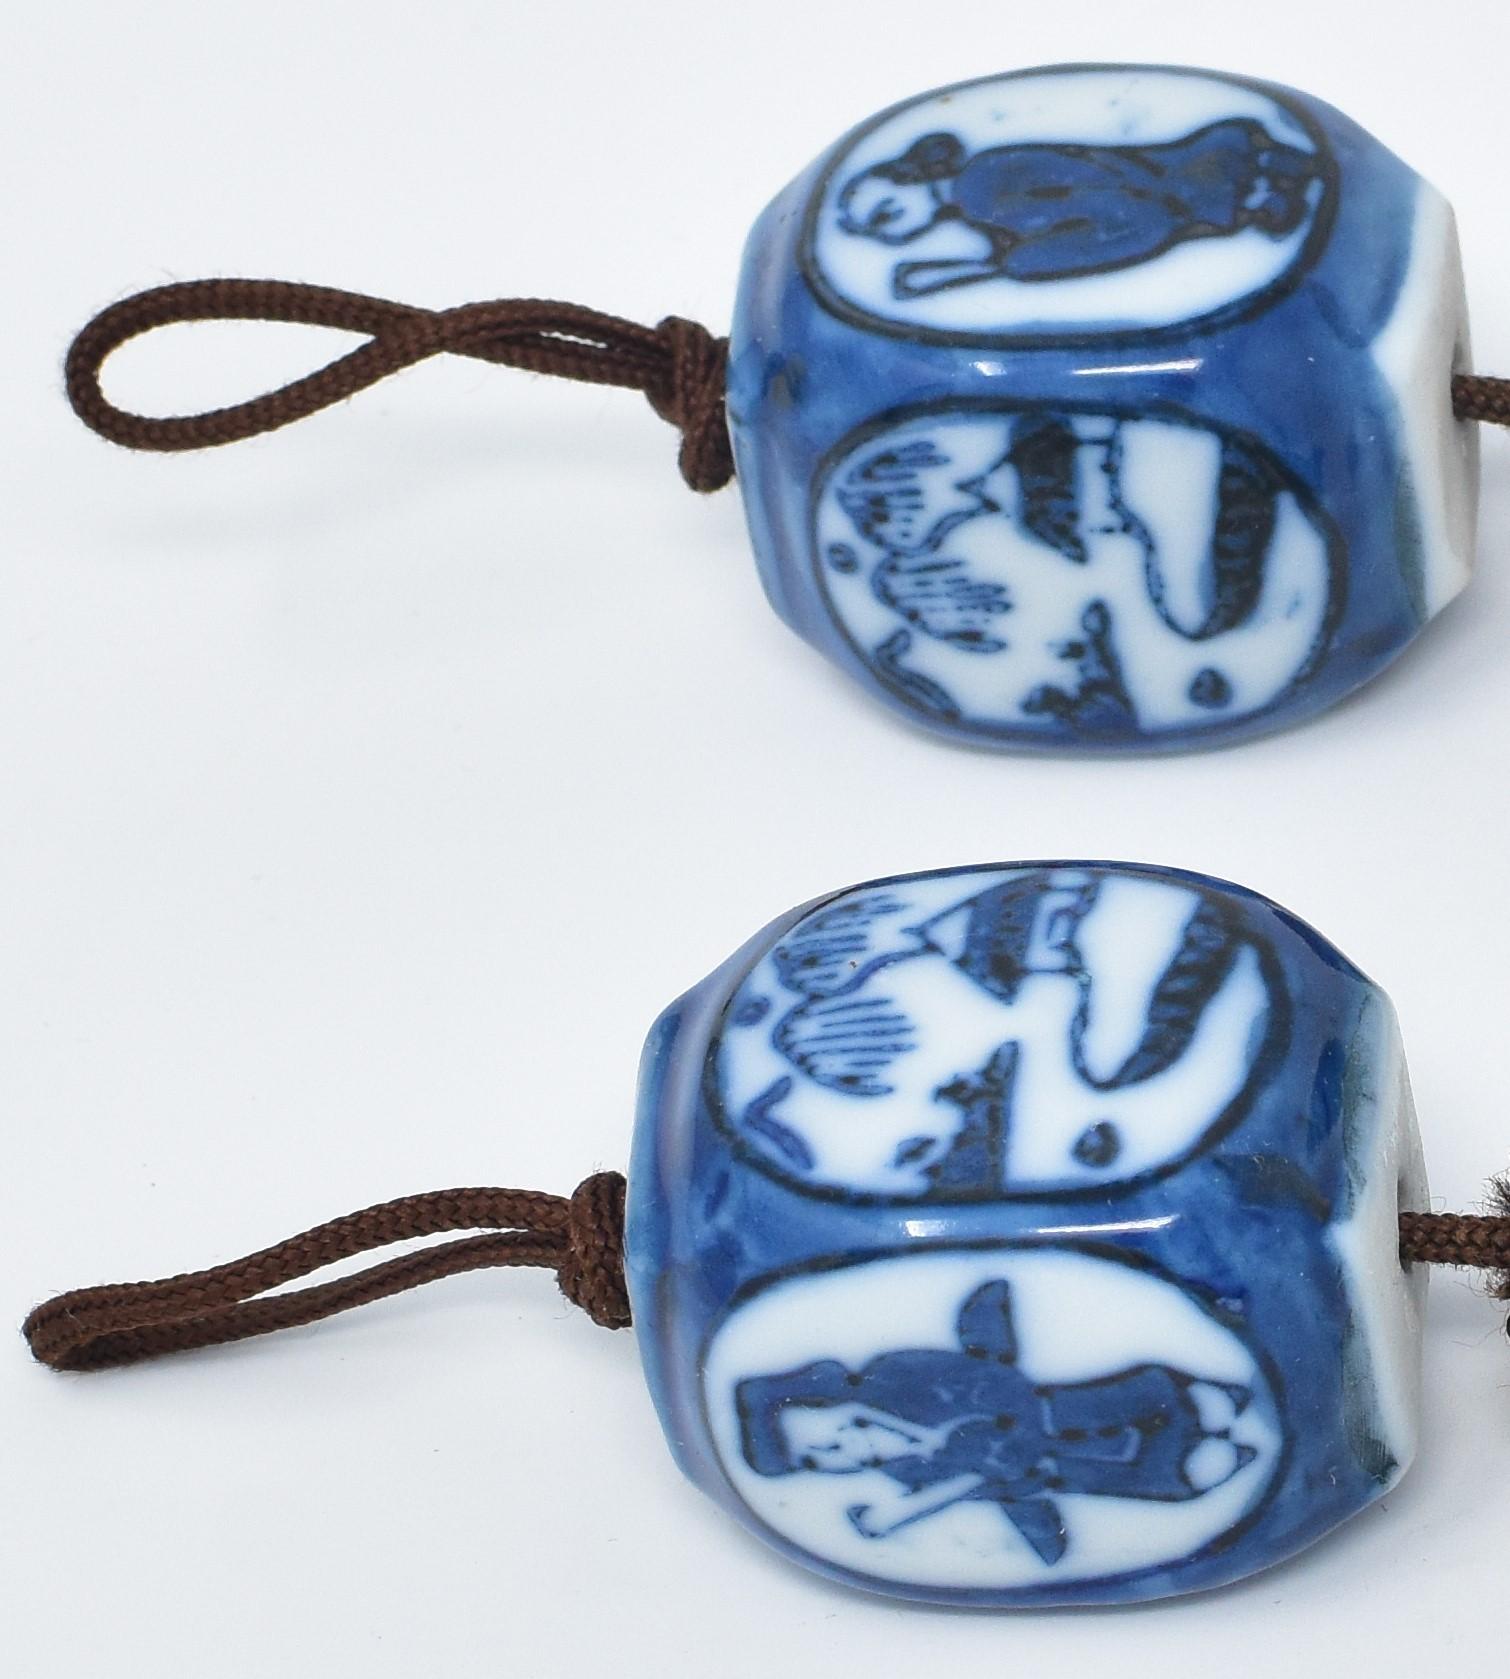 Elegant pair of vintage Japanese porcelain scroll weights (fuchin) in underglaze blue on white.
Dating from the prewar Showa period of circa 1960, these rectangular-shaped scroll weights are hand painted in underglazed blue on white background.